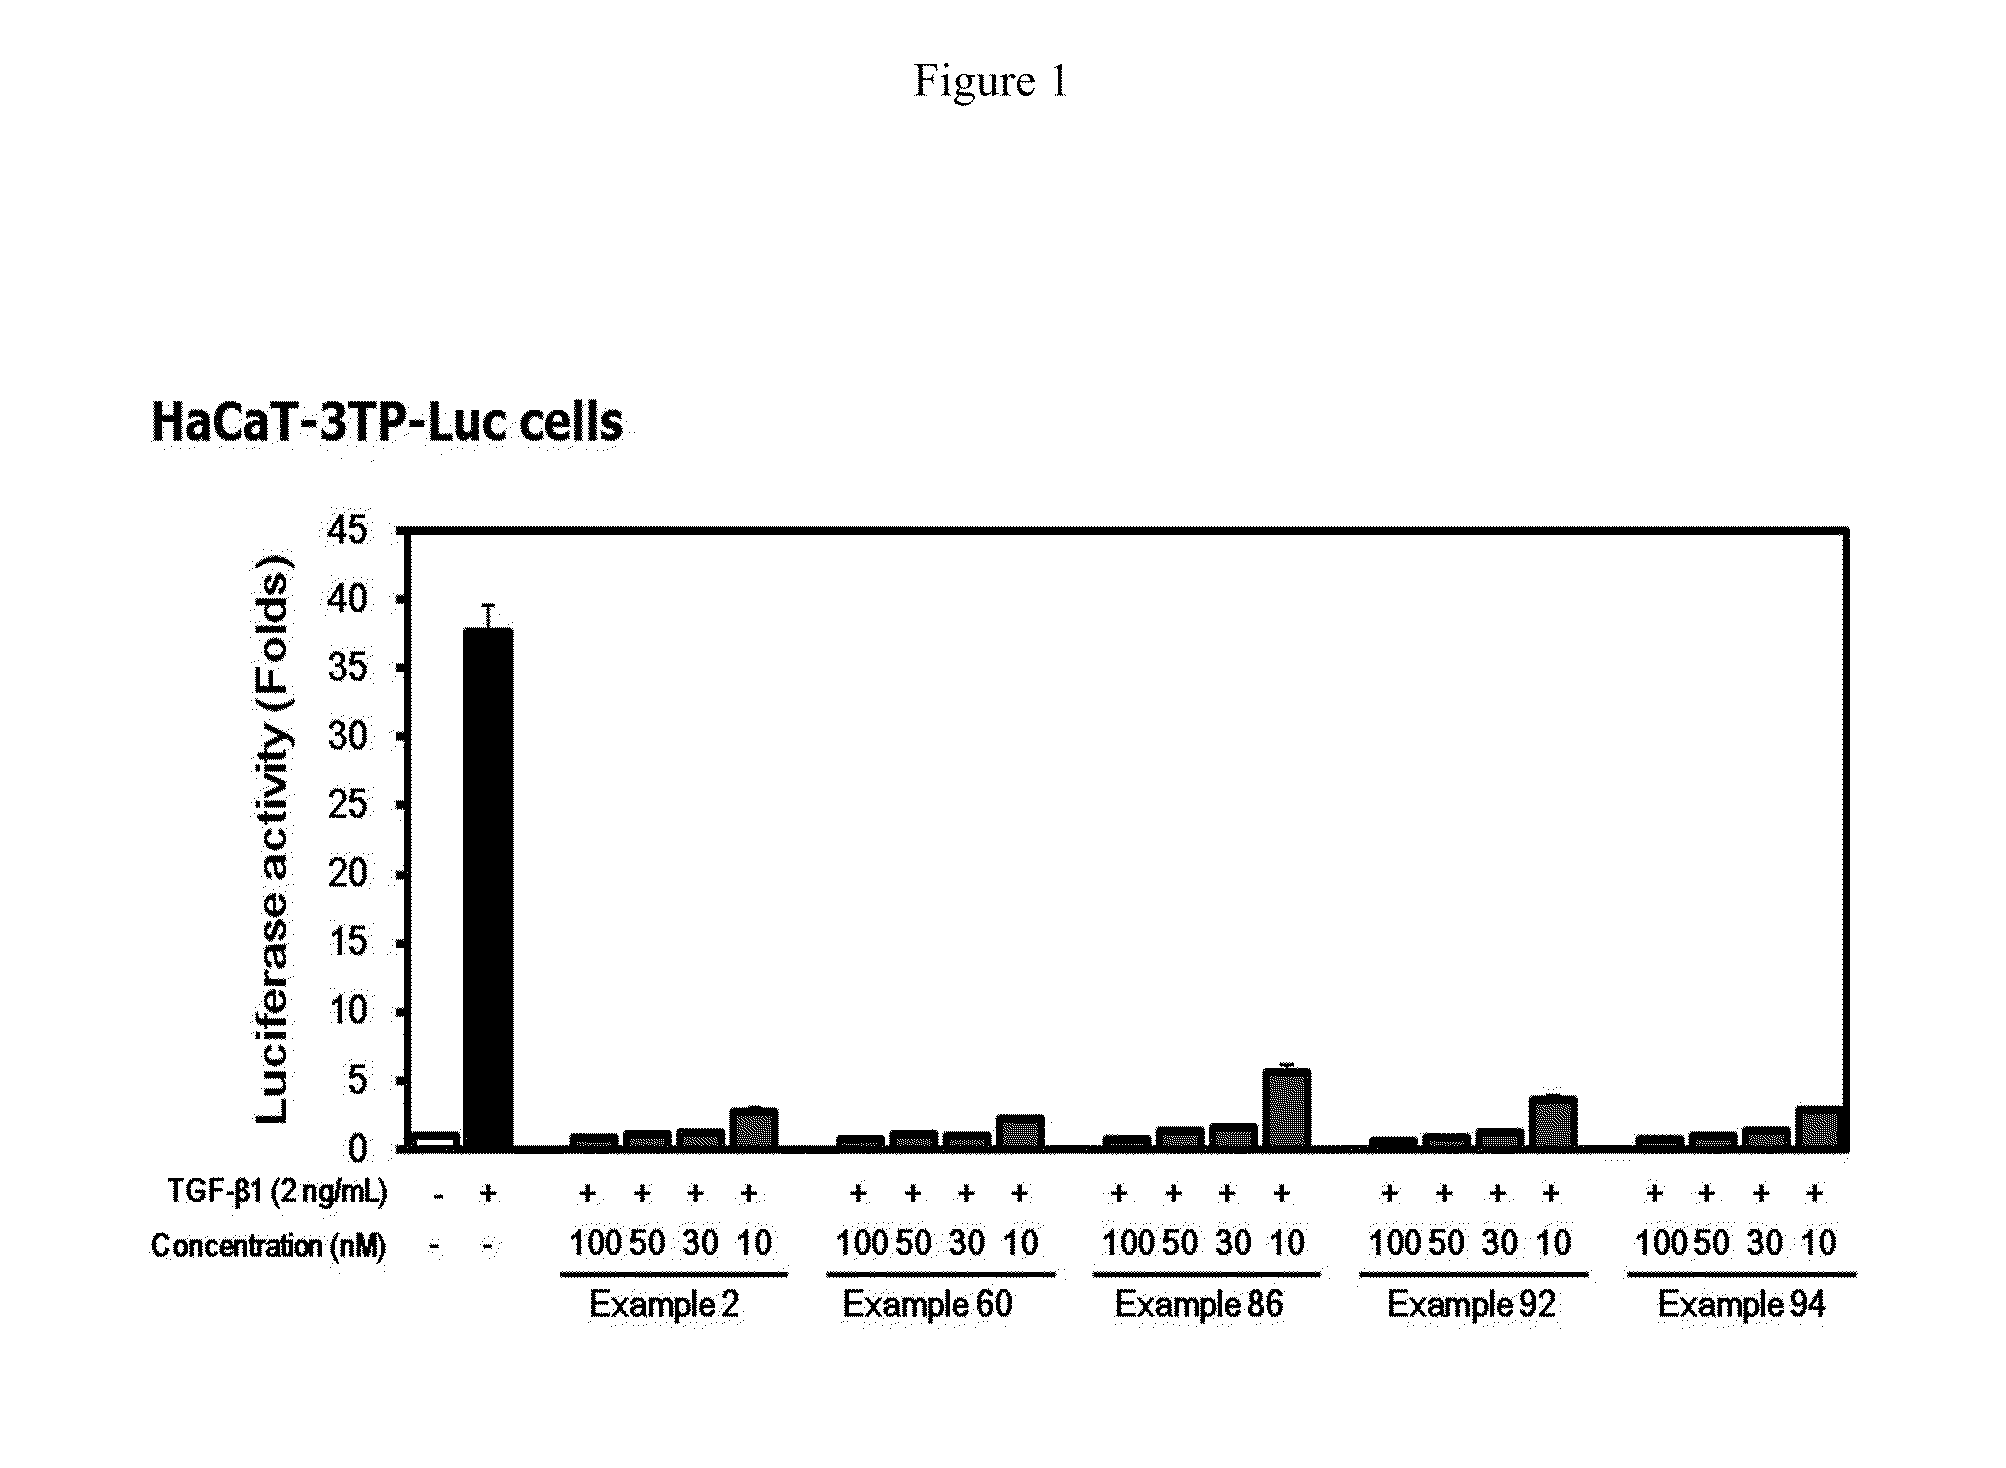 Methods of Treating Fibrosis, Cancer and Vascular Injuries